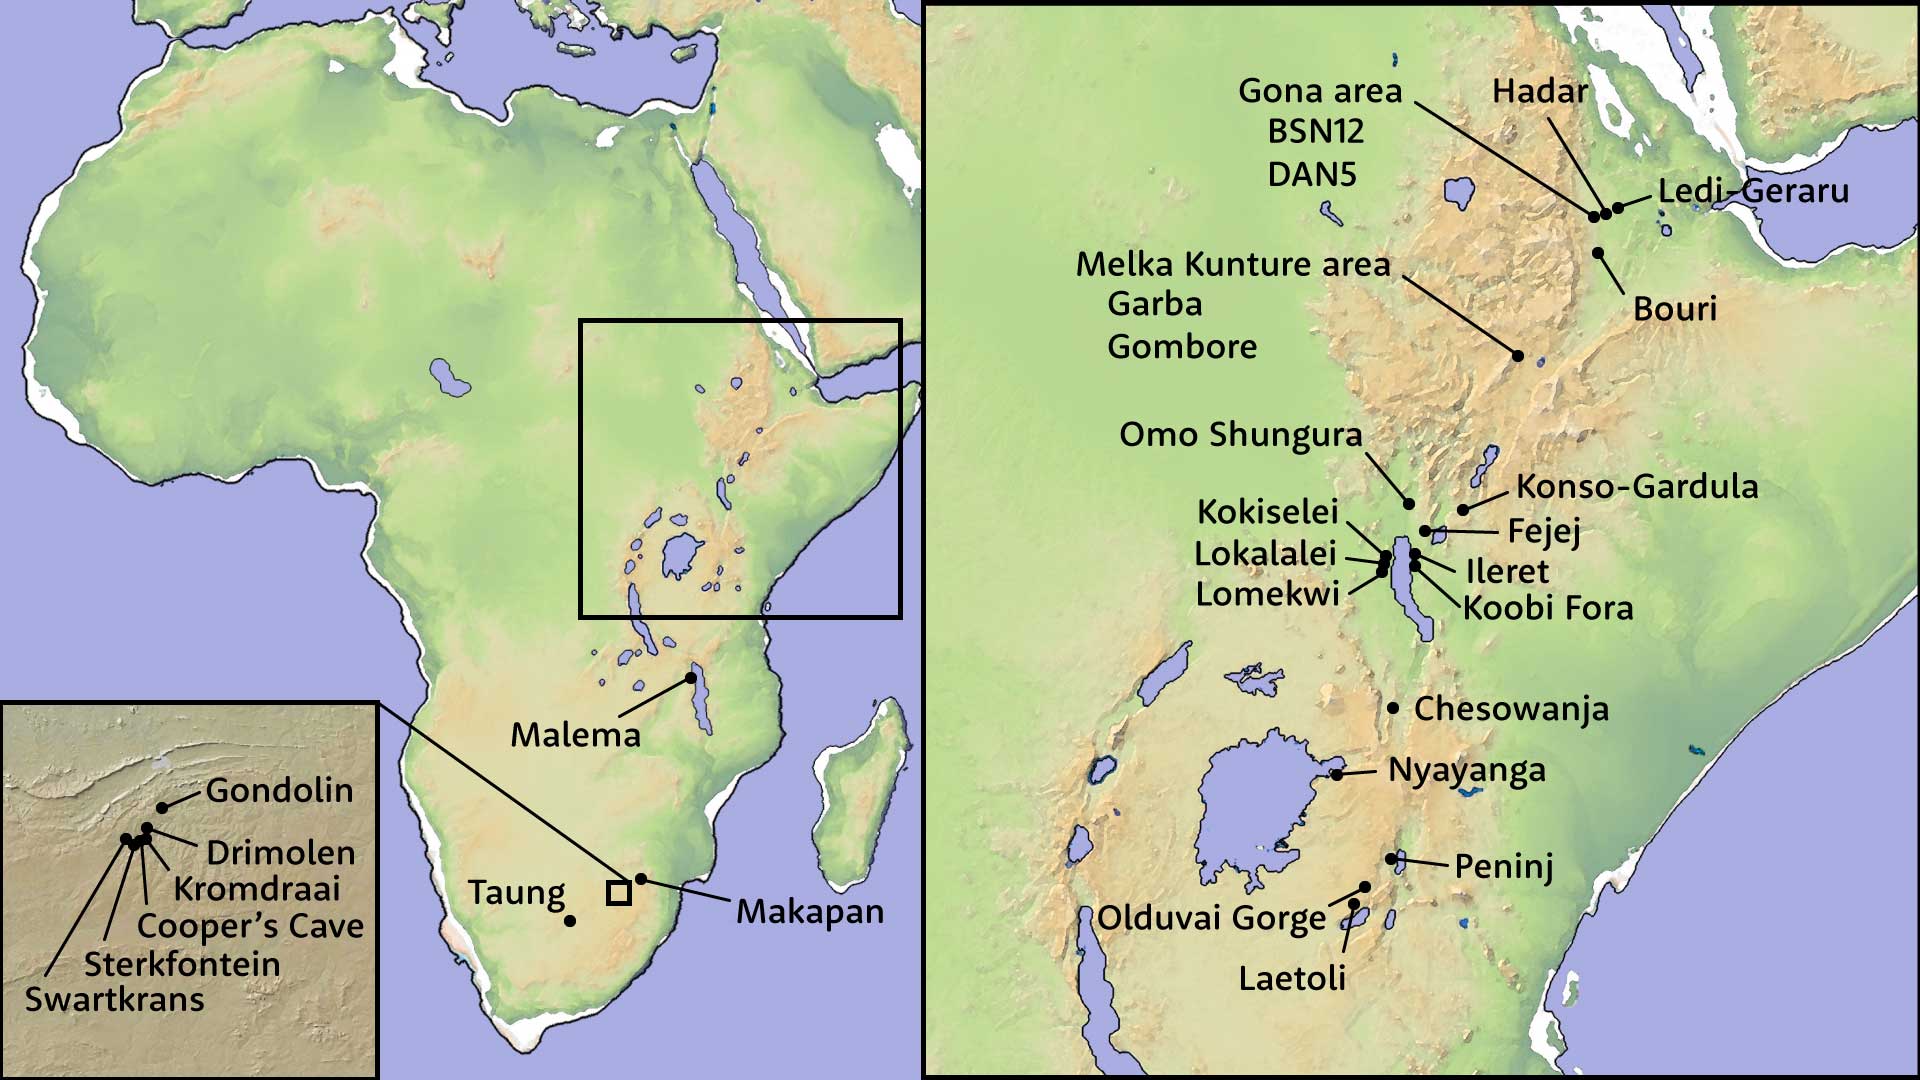 Map of Africa with insets of the East African Rift System and Cradle of Humankind area of South Africa, with sites labeled